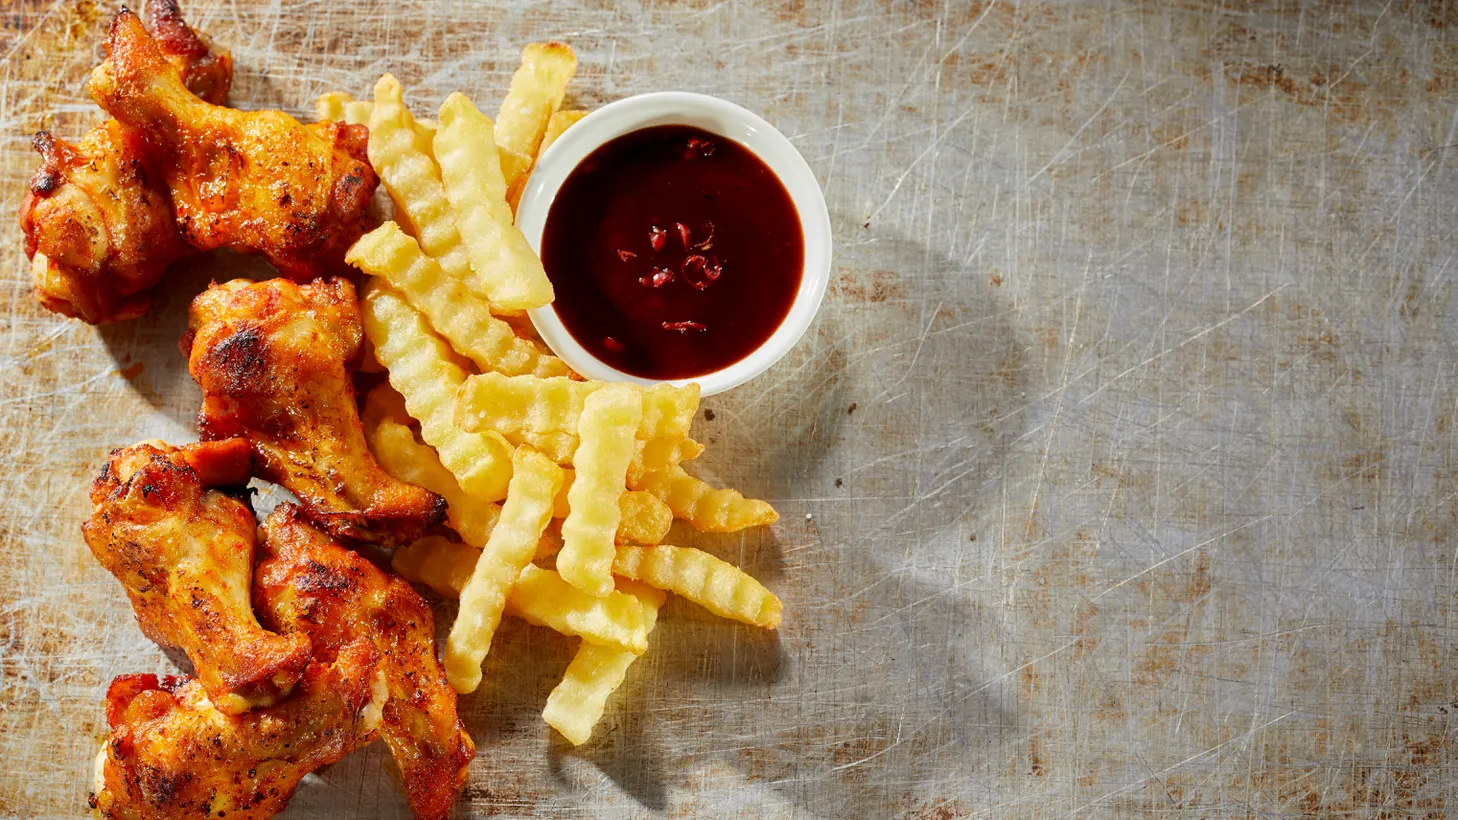 You can get spicy fried chicken with crinkle-cut fries at Dodger Stadium.